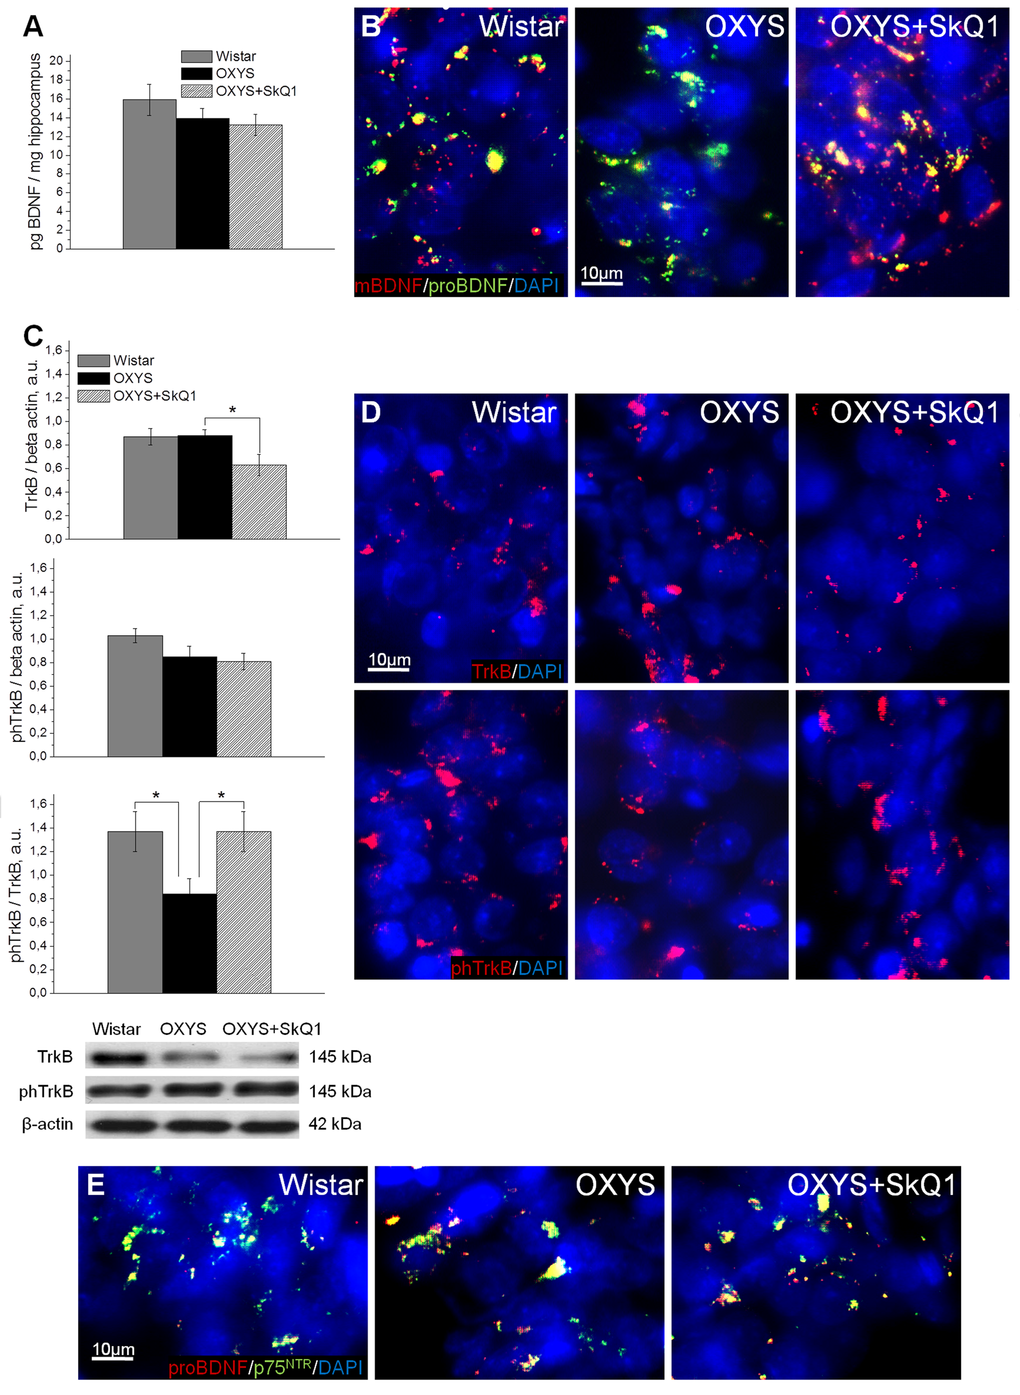 SkQ1 improves neurotrophic supply in the hippocampus. (A) Enzyme immunoassay analysis showed no differences in the levels of total hippocampal BDNF among 18-month-old Wistar rats, untreated OXYS rats, and SkQ1-treated OXYS rats (n=8). (B) Representative 40 × immunofluorescent images of staining for mBDNF (red), proBDNF (green), and cell nuclei (DAPI, blue) in the CA1 region of the hippocampus. (C) Hippocampus levels of TrkB and phTrkB were not different between Wistar rats and untreated OXYS rats (n=6). The level of TrkB decreased in the hippocampus of SkQ1-treated OXYS rats (pD) Representative 40× immunofluorescent images of staining for receptors TrkB (red; upper row) and phTrkB (red; lower row) and for cell nuclei (DAPI, blue) in the CA1 region of the hippocampus. (E) Representative 40× immunofluorescent images of colocalization of proBDNF (red), p75NTR receptor (green), and cell nuclei (DAPI, blue) in the CA1 region of hippocampus. A.u.: arbitrary units. The data are shown as mean ± SEM. Statistical significance (p